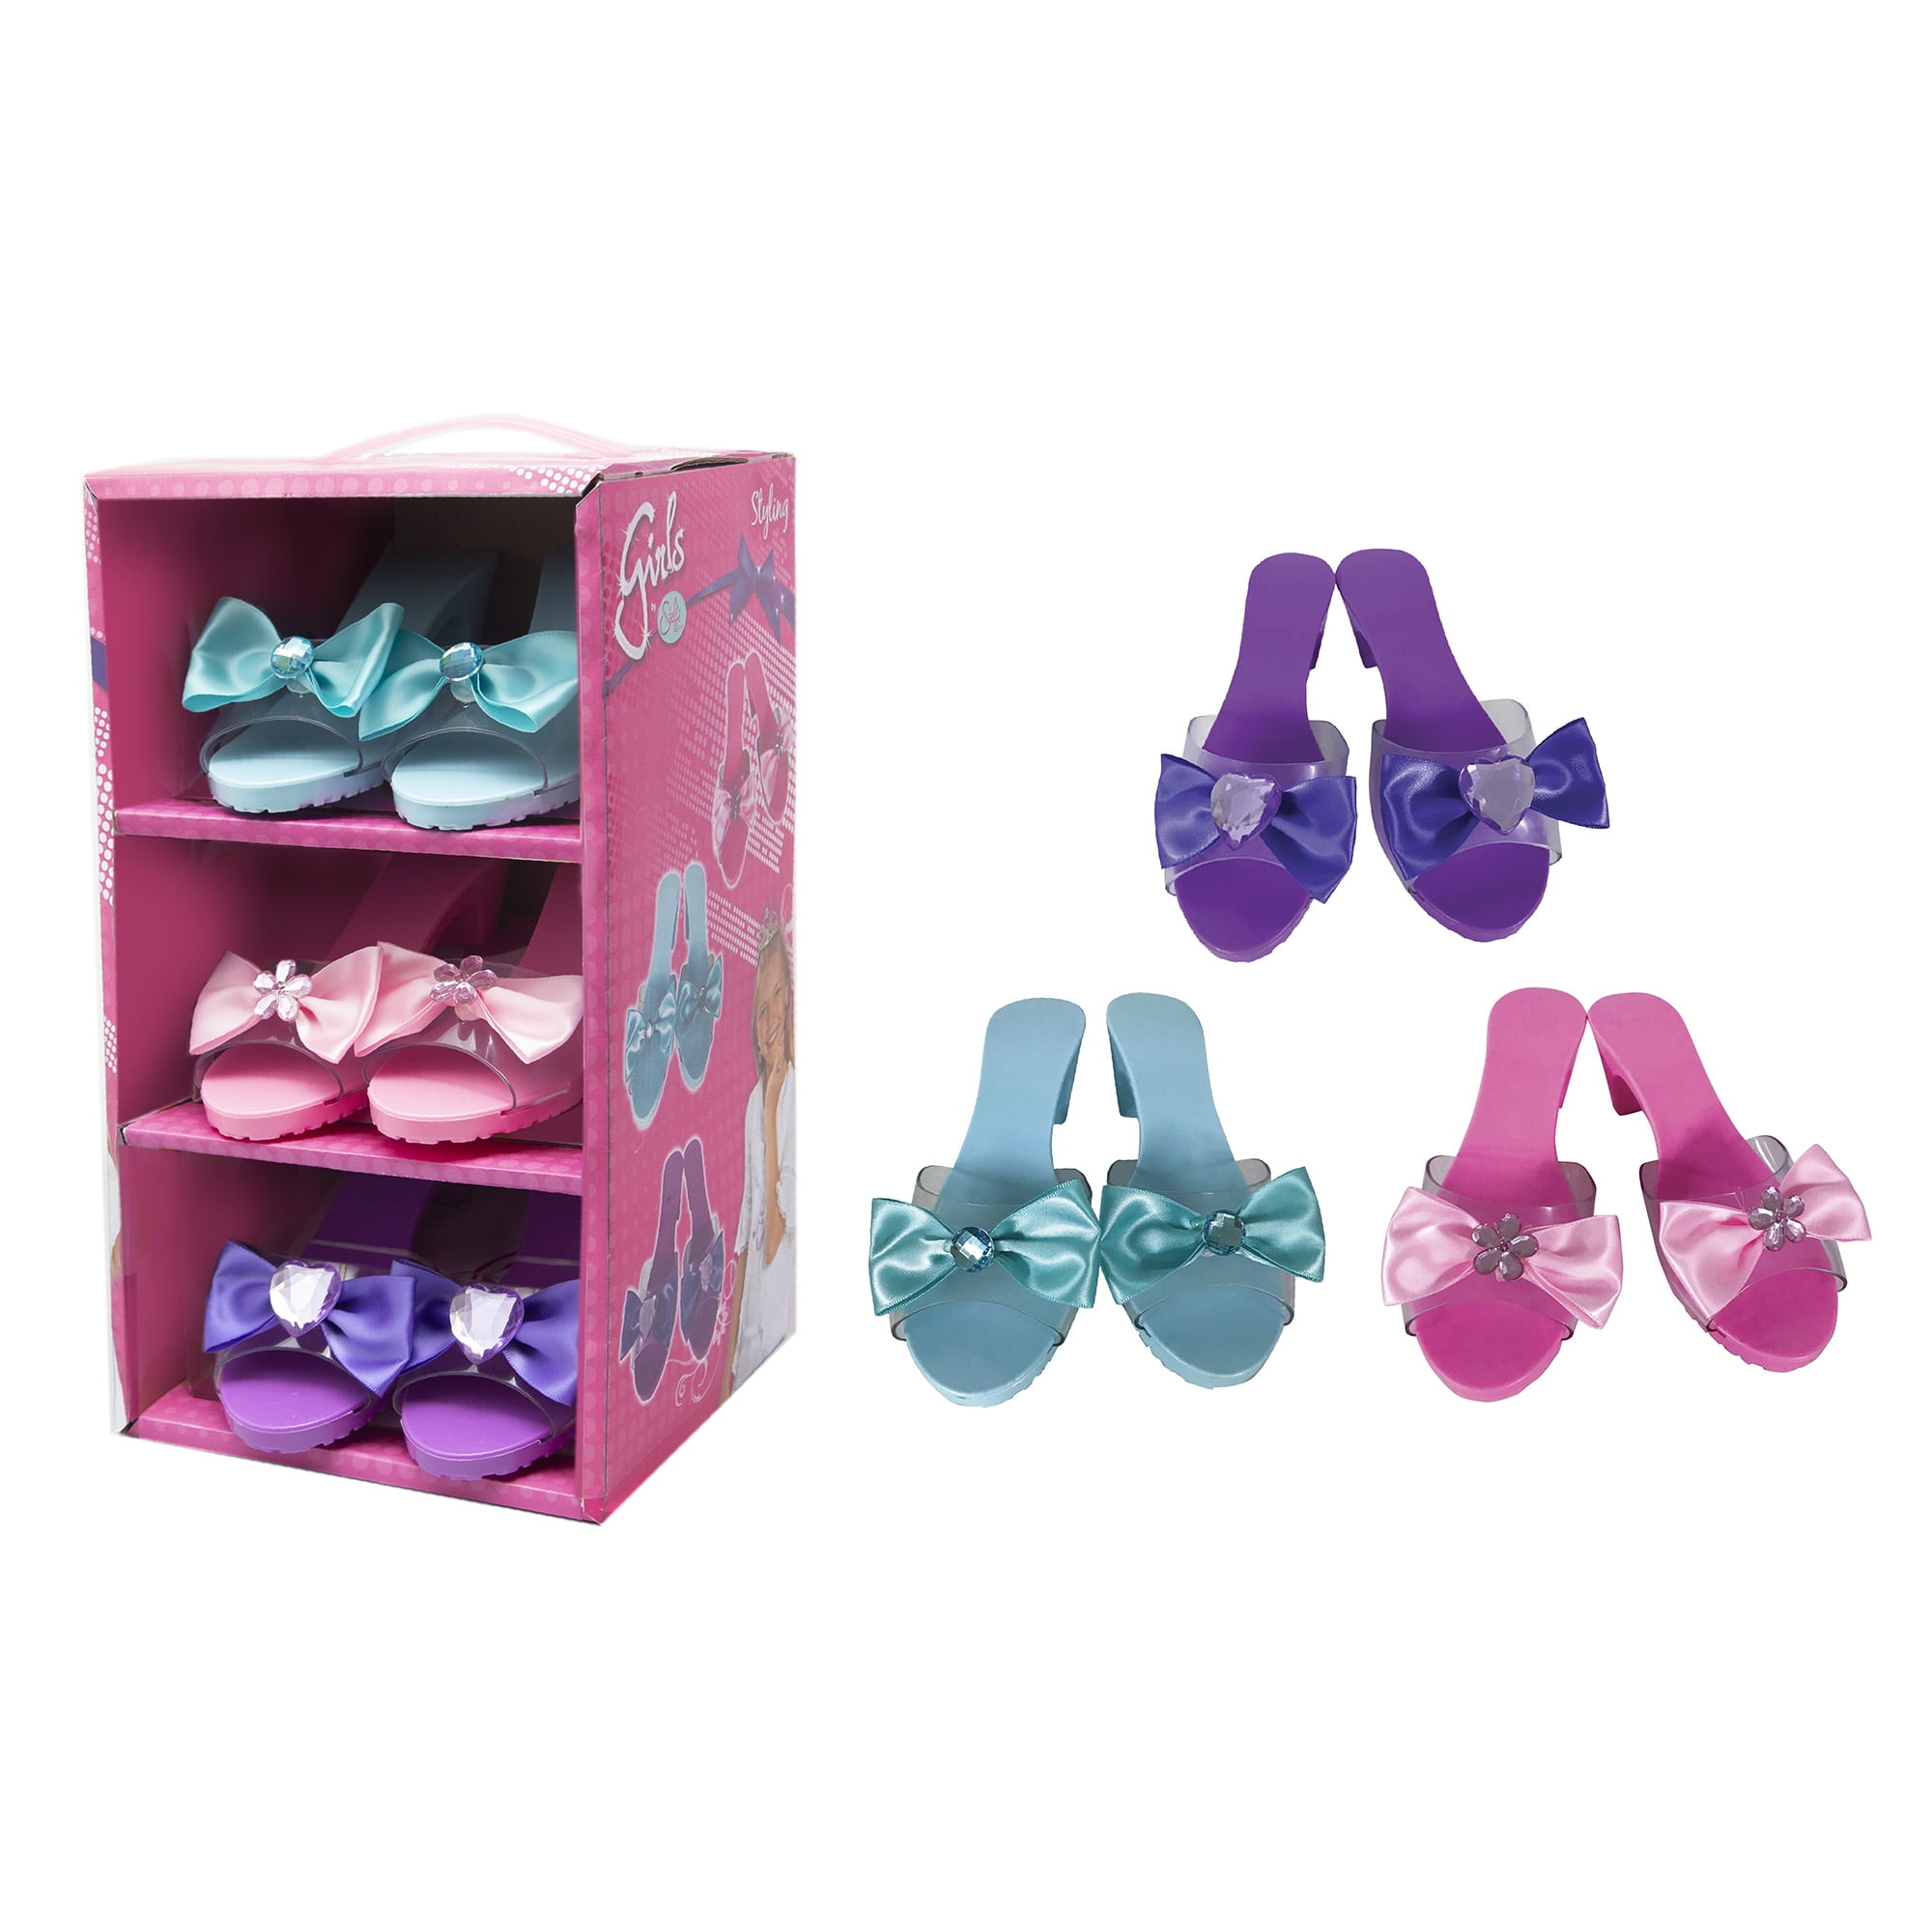 Princess Role Play Details about   Teuevayl Girls Princess Dress Up Shoes and Jewelry Boutique 